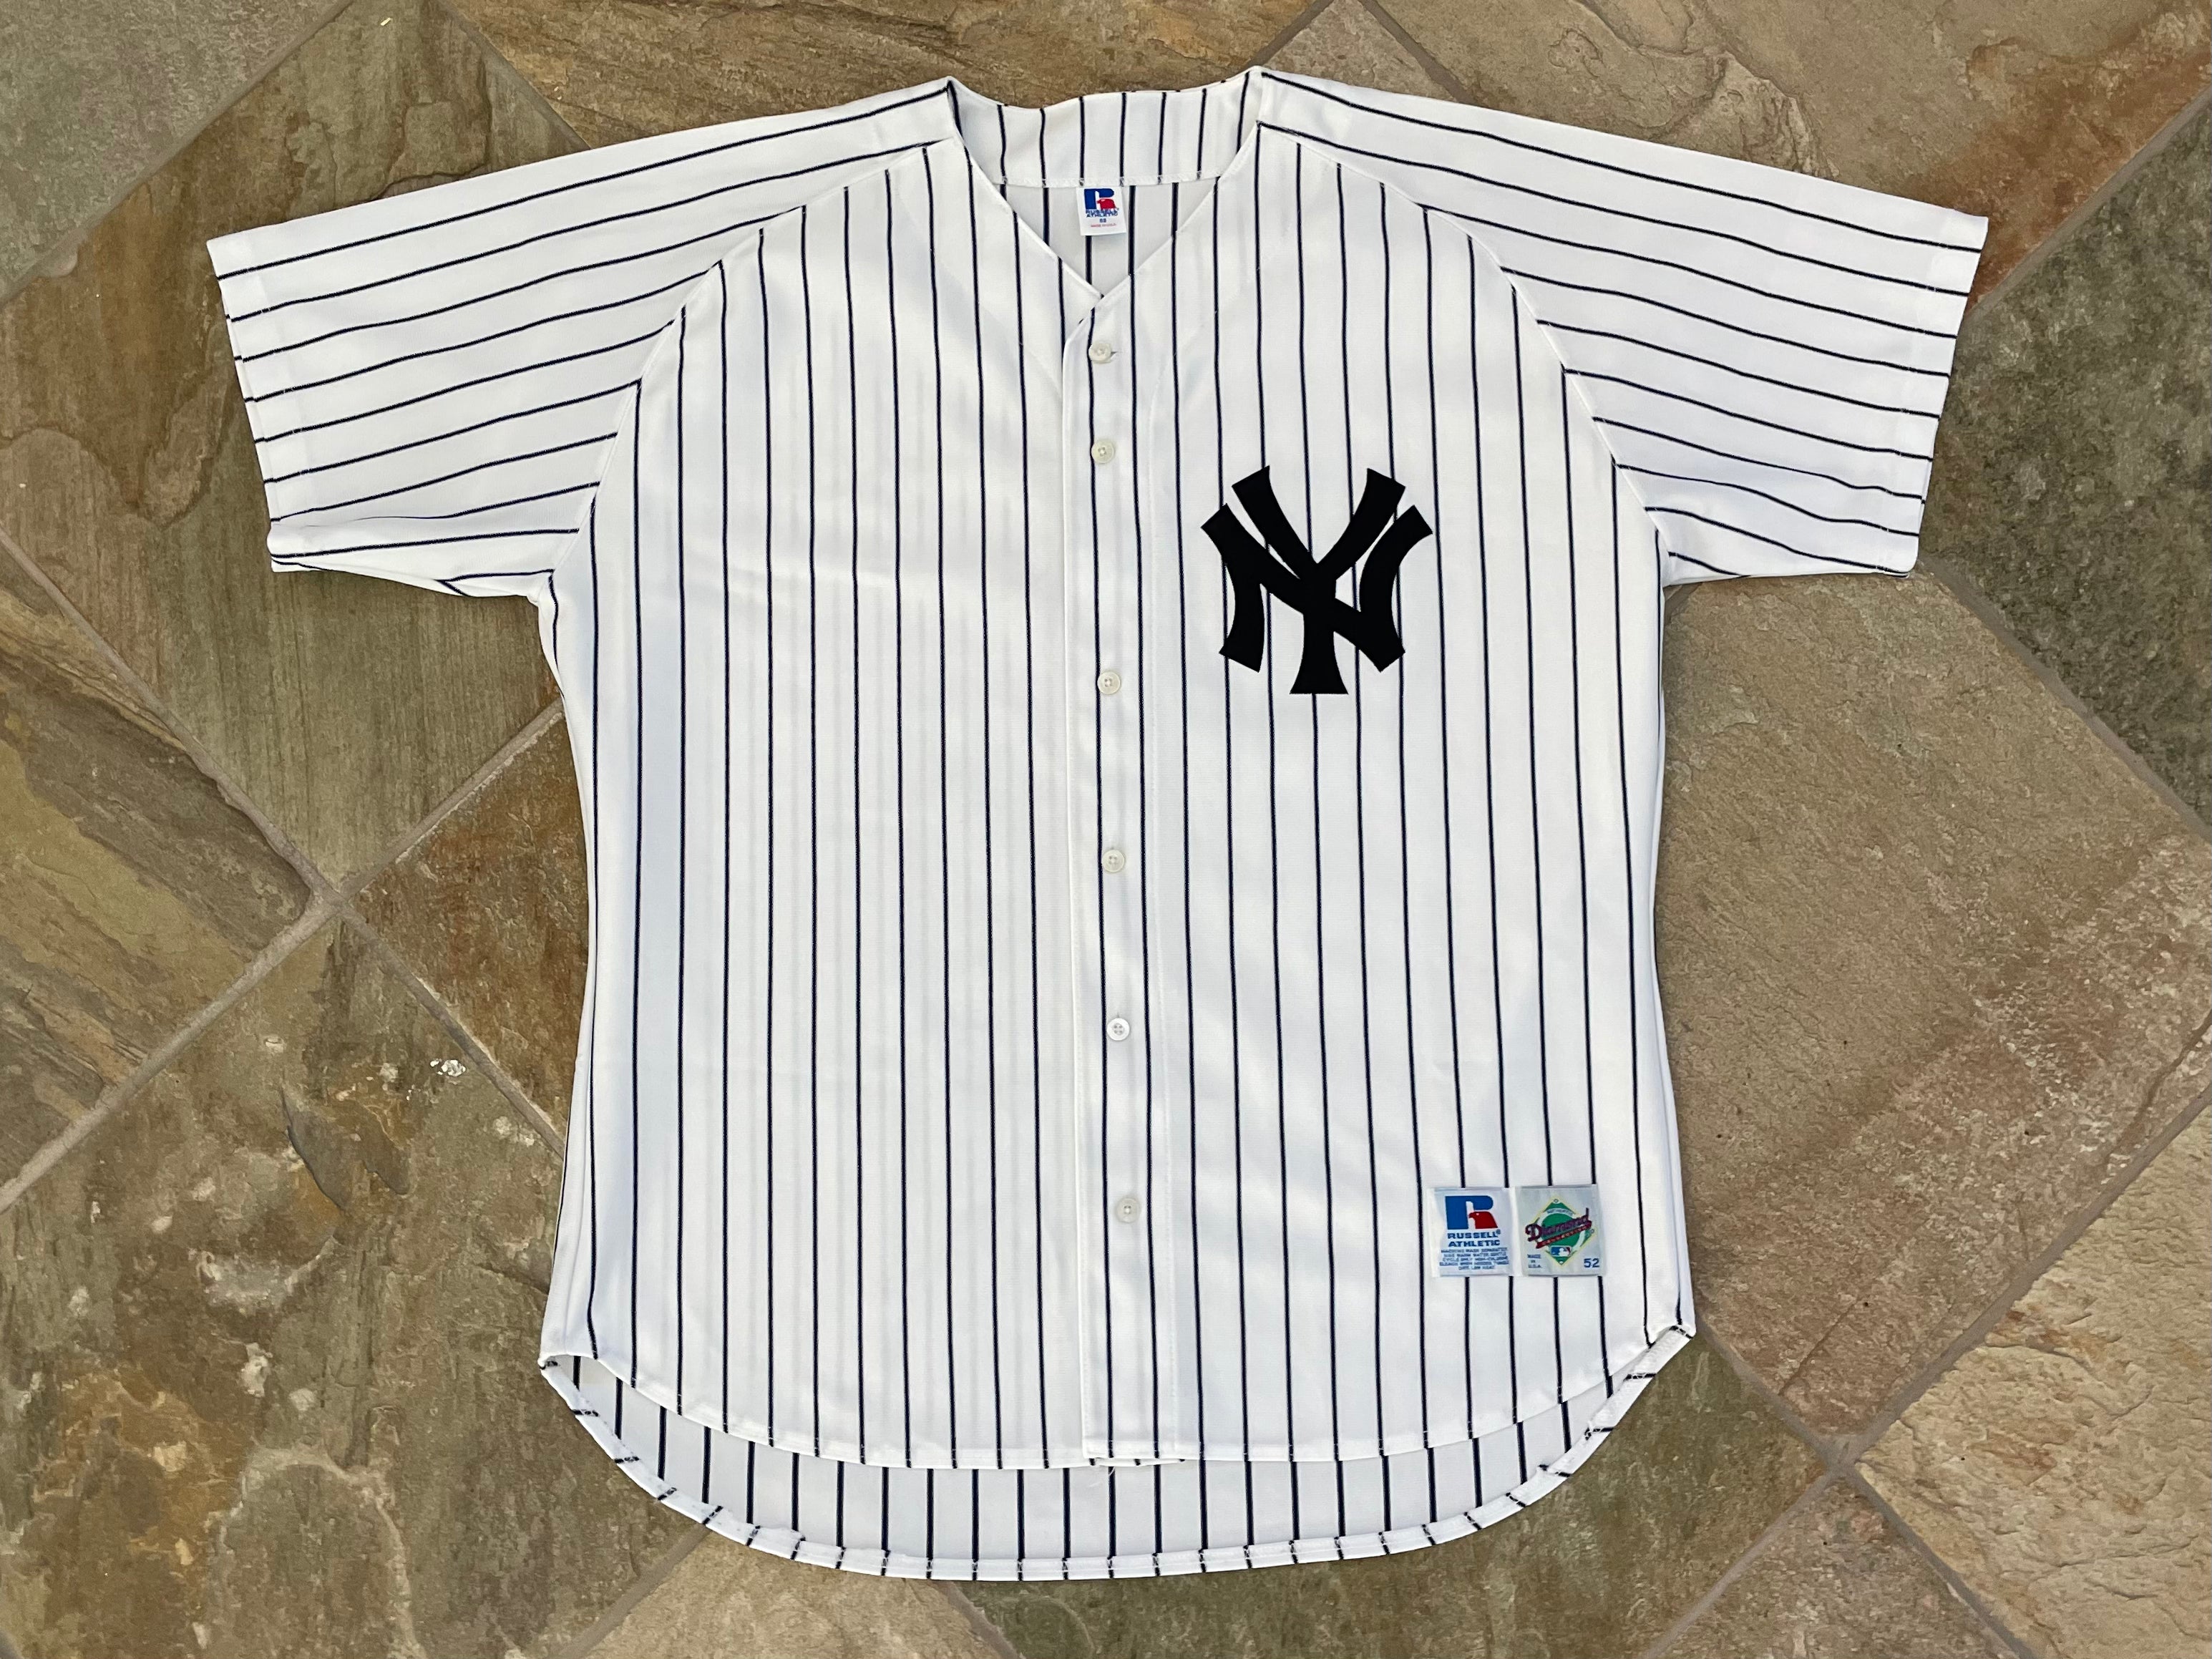 NWT MLB RUSSEL YOUTH JERSEY - NEW YORK YANKEES GREY/ PINK - 5/6